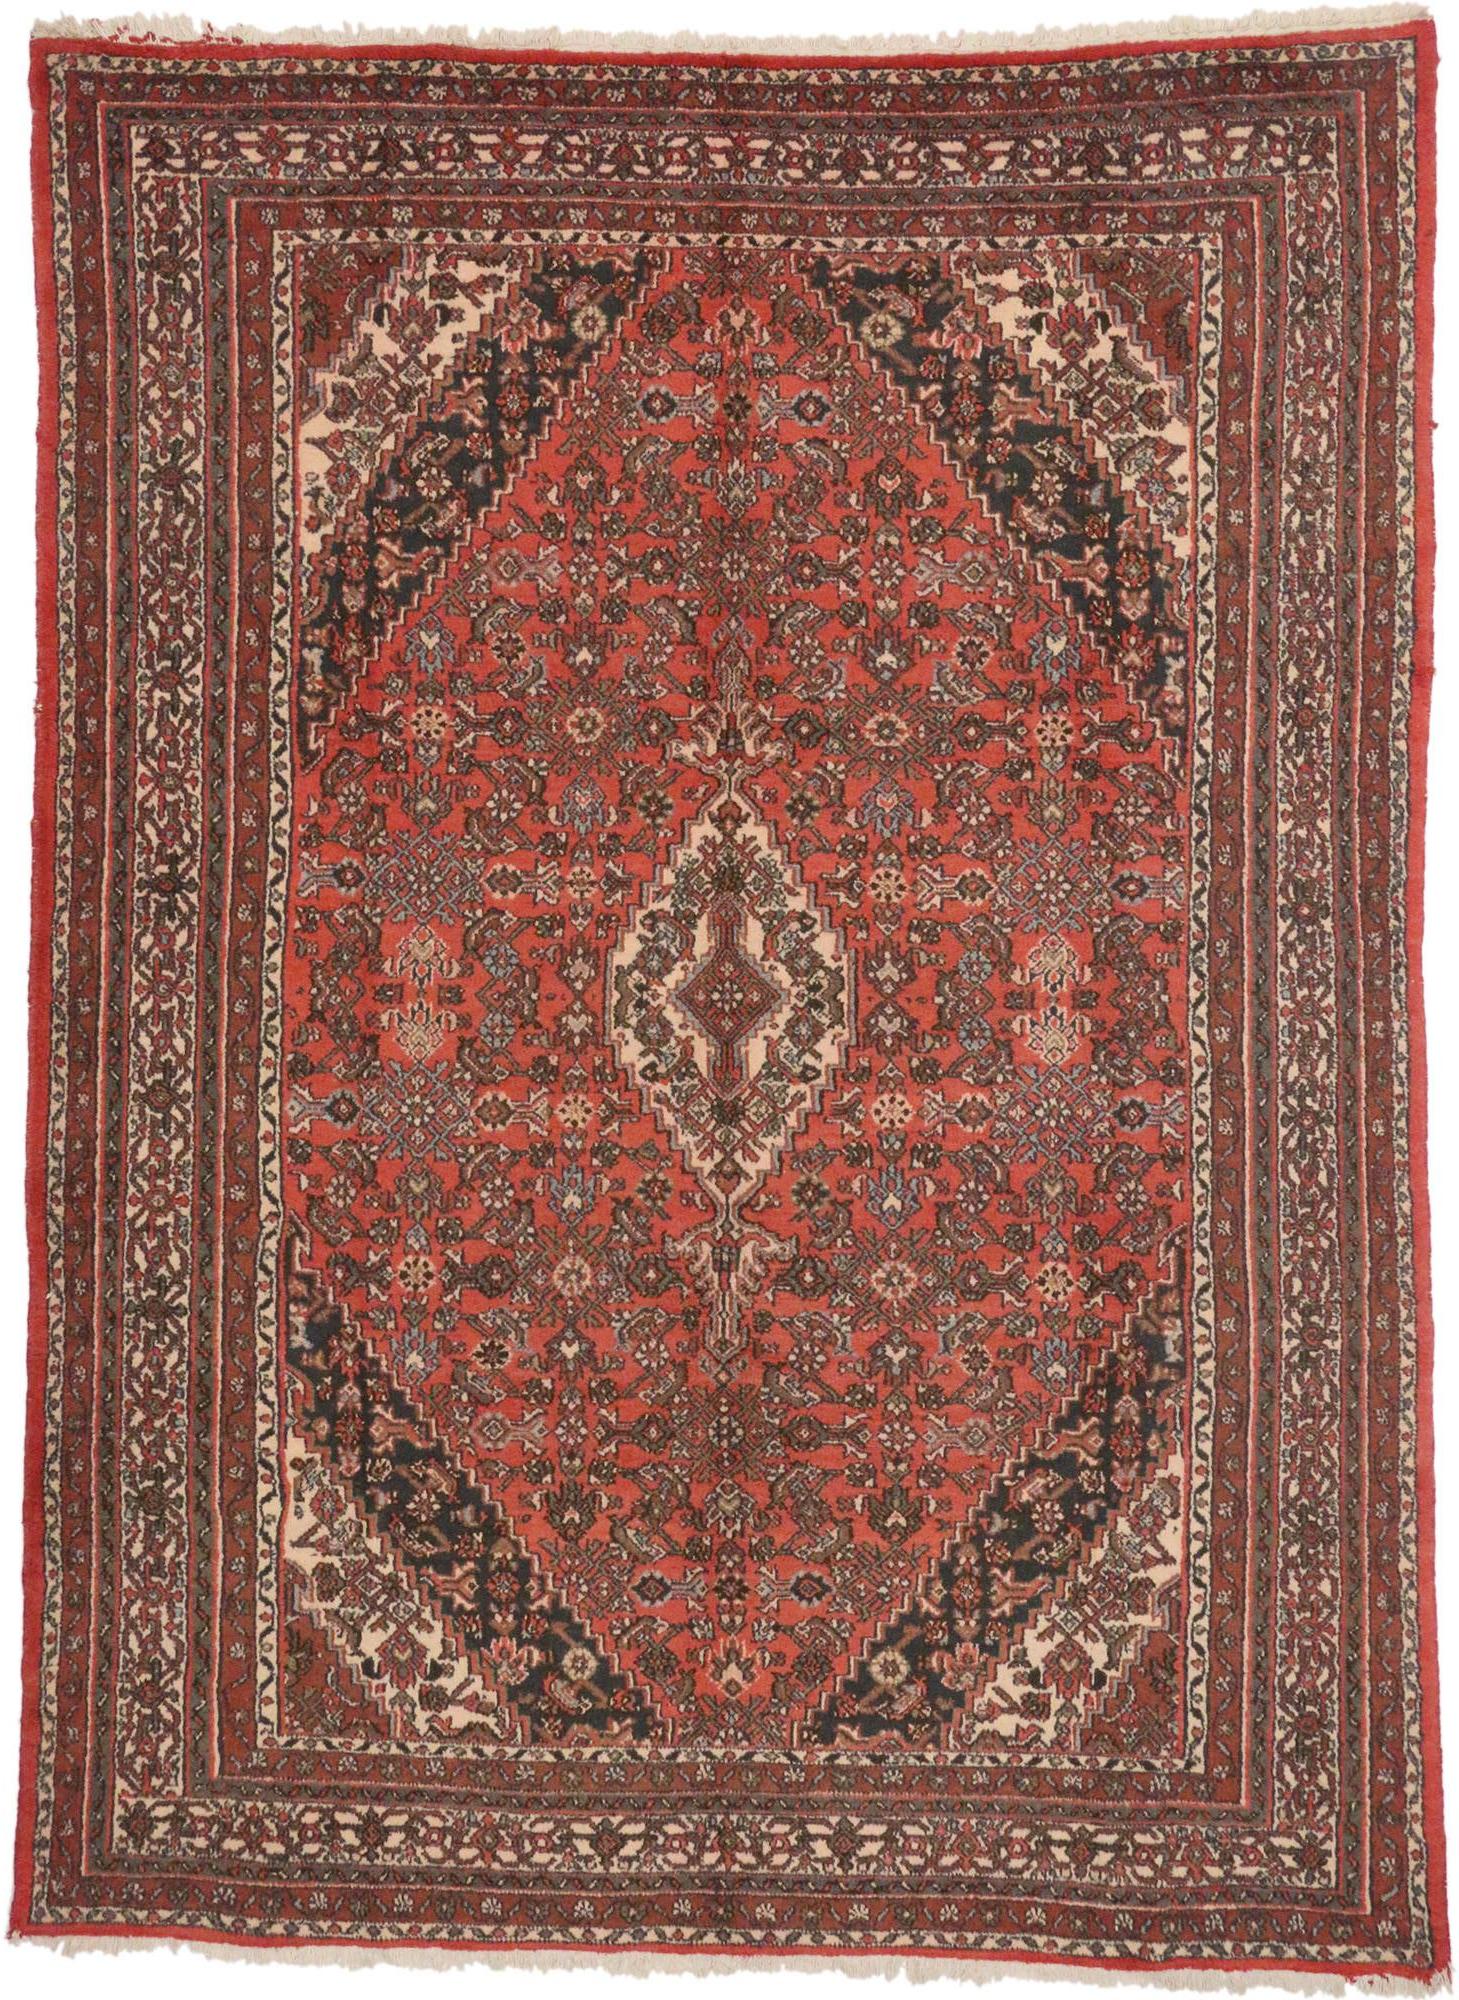 72034 Vintage Hamadan Persian Rug with Traditional Style 08’07 x 11’08 From Esmaili Rugs Collection. Providing an element of comfort, artistic statement and functional versatility, this vintage Hamadan Persian rug with Herati design creates a quiet